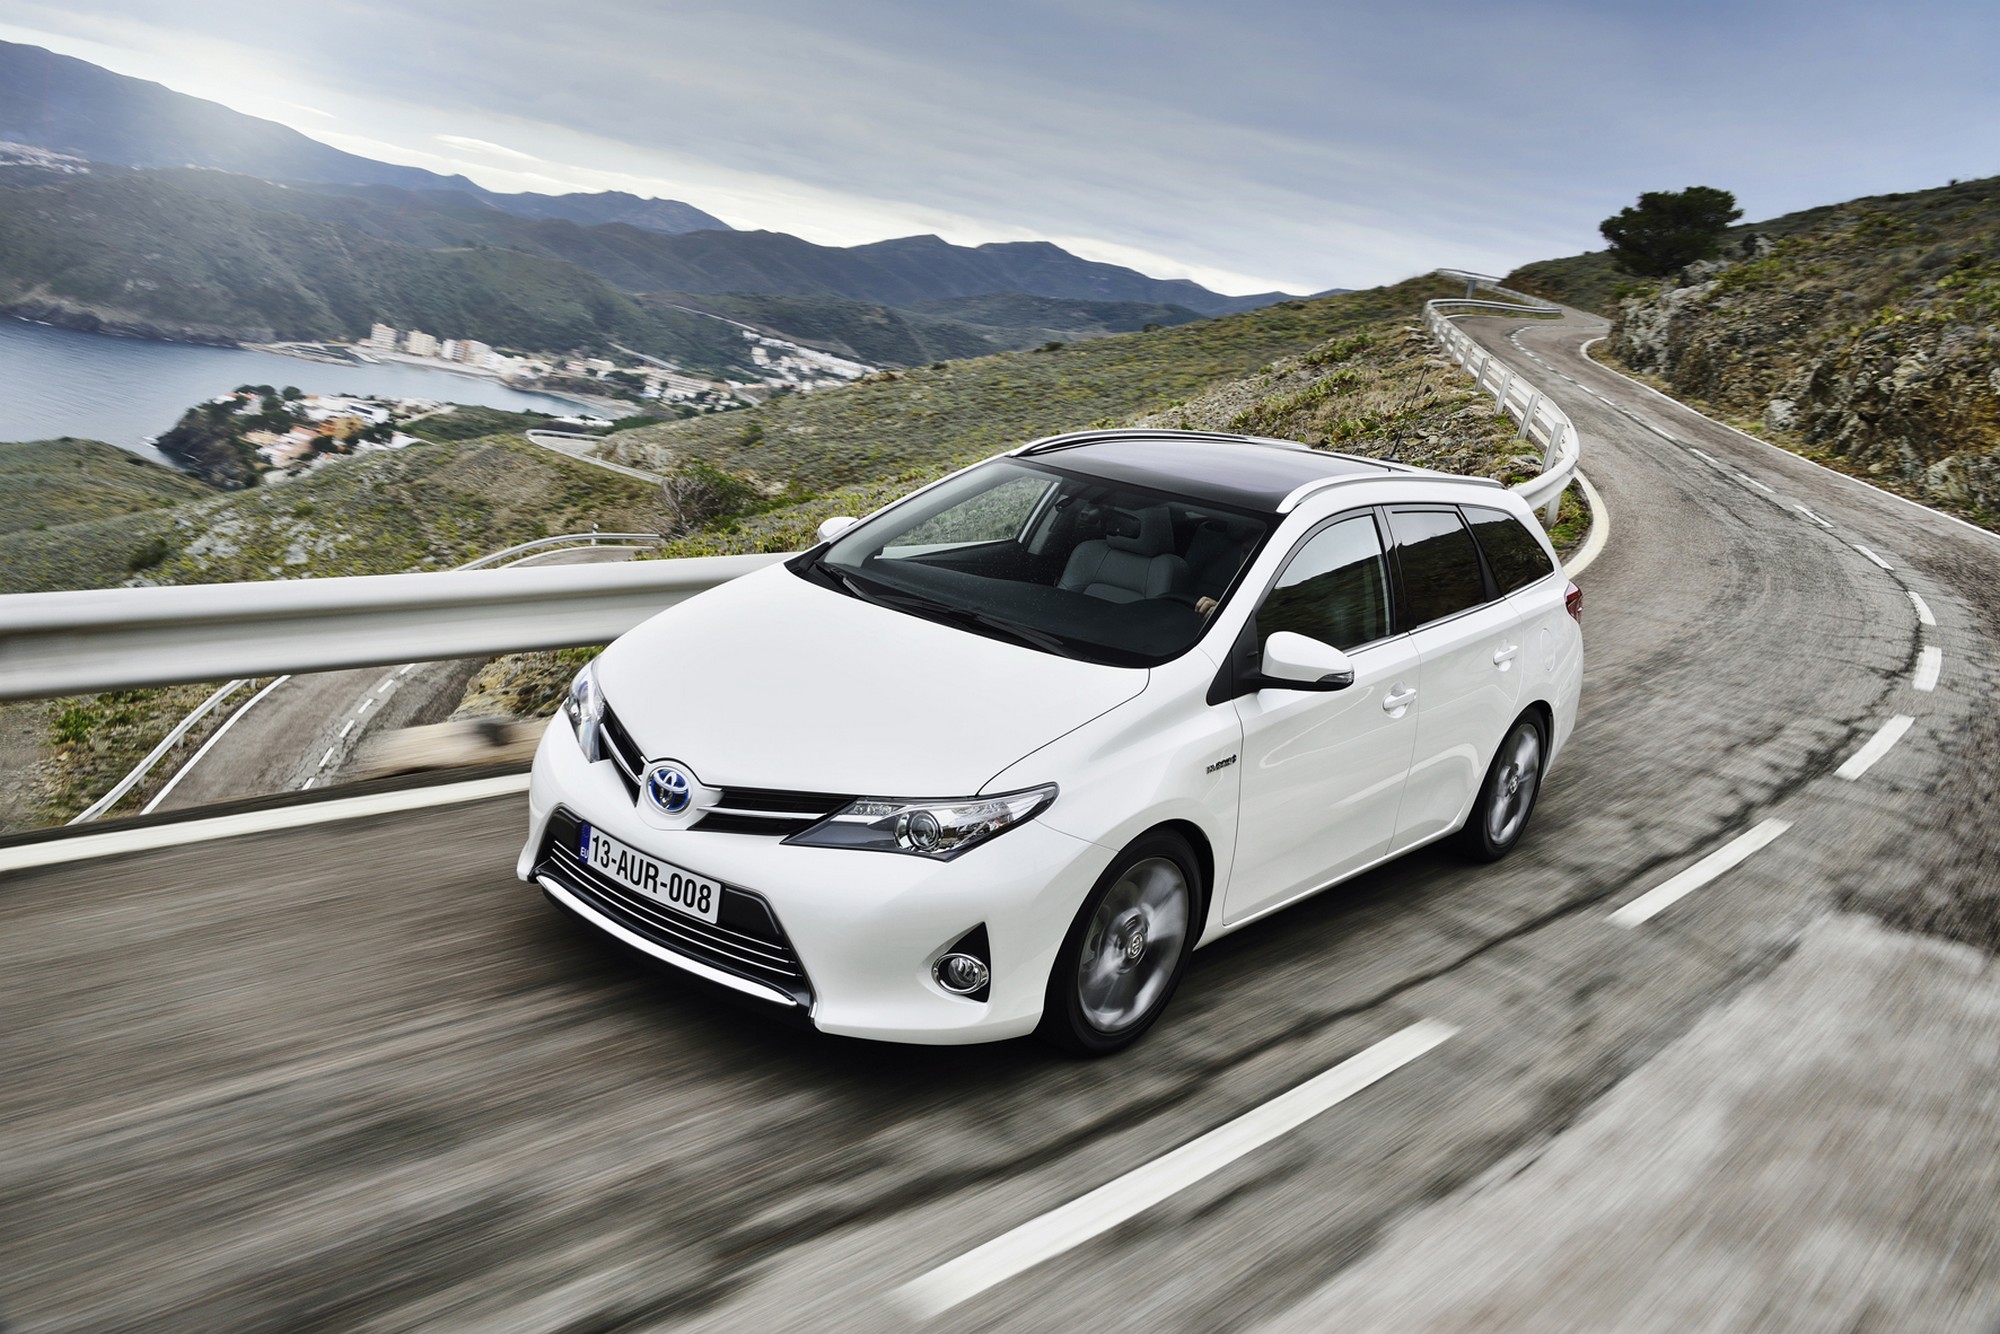 Toyota Auris: Comprehensive Guide to Technical Specifications